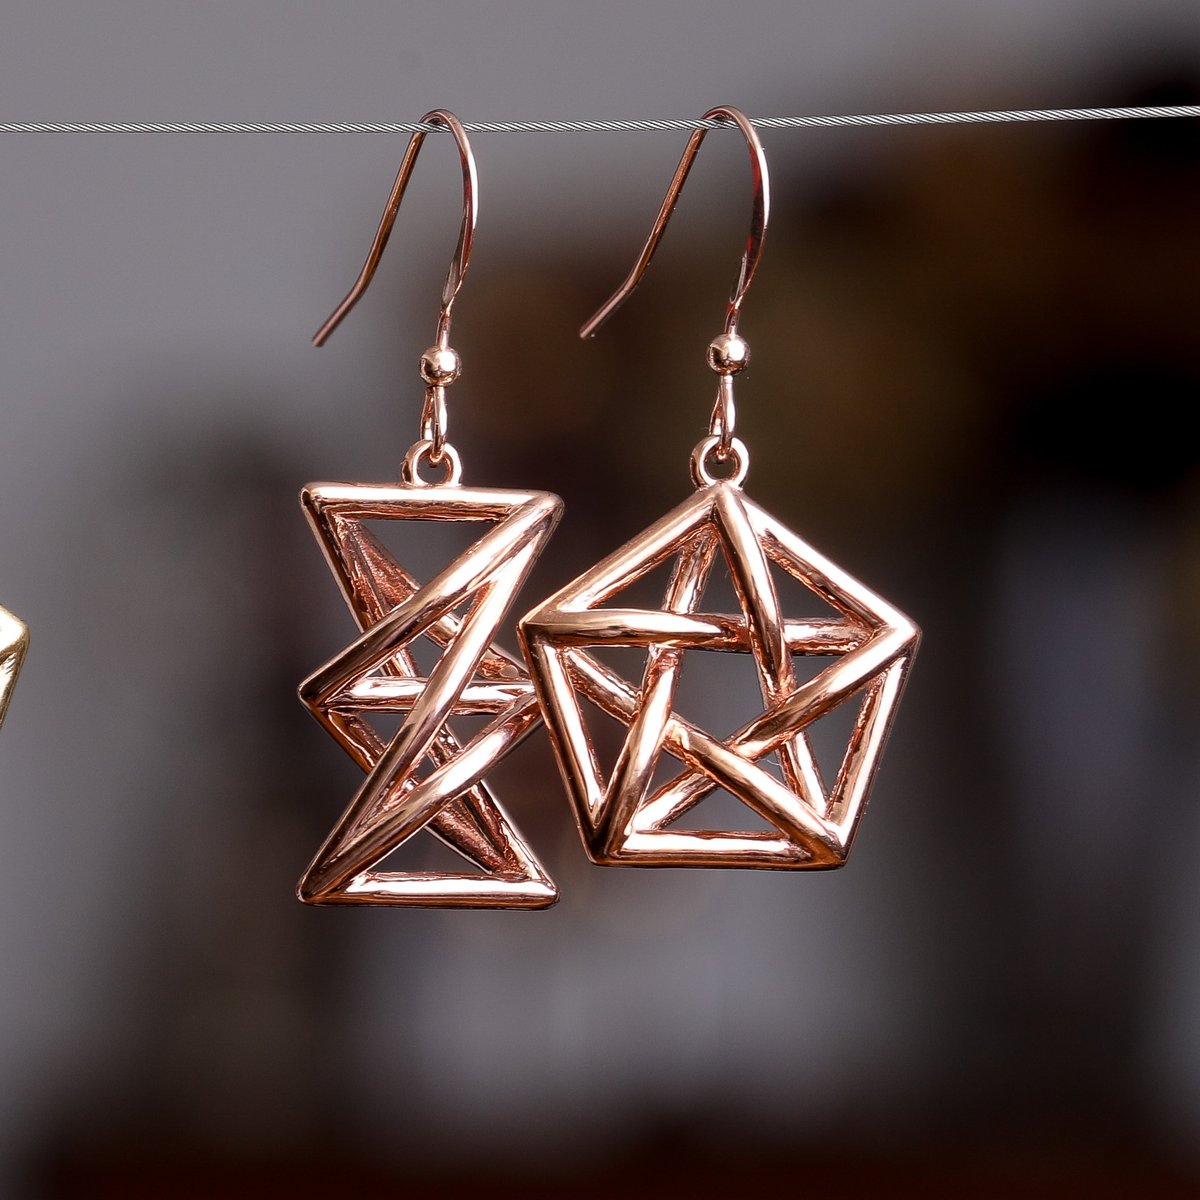 Forbidden Subgraph earrings are inspired by Kuratowski's theorem: that it is *impossible* to draw a graph on paper without edges crossing if your graph contains K33 or K5 (left/right). Brass and Bronze versions in stock now at hdsn.us/ME230. #mathjewelry #graphtheory